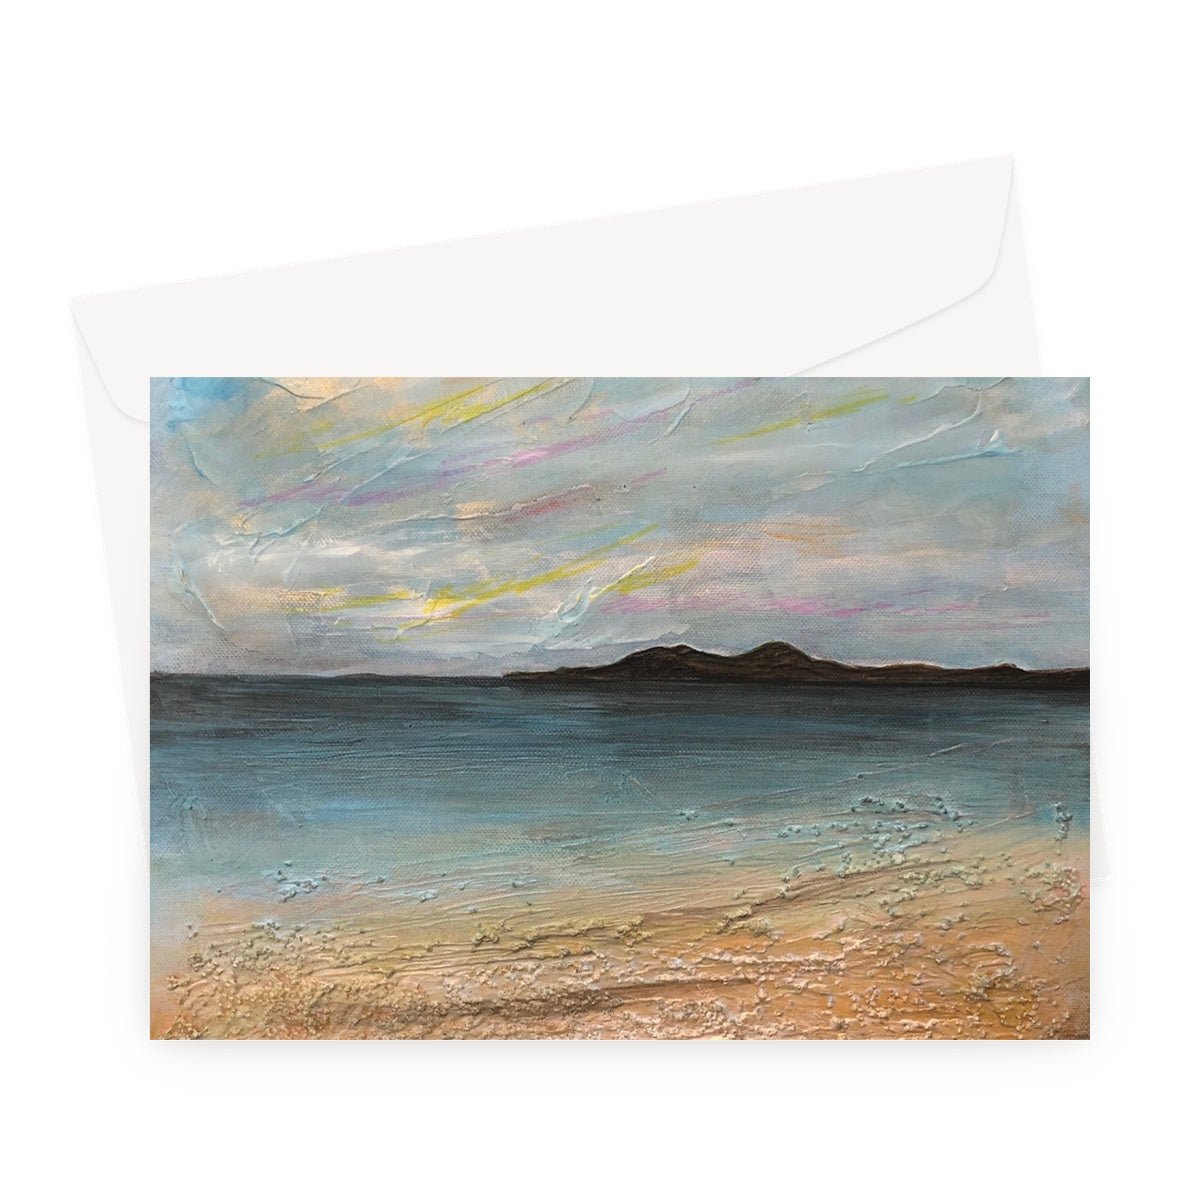 Garrynamonie Beach South Uist Art Gifts Greeting Card-Greetings Cards-Hebridean Islands Art Gallery-A5 Landscape-10 Cards-Paintings, Prints, Homeware, Art Gifts From Scotland By Scottish Artist Kevin Hunter